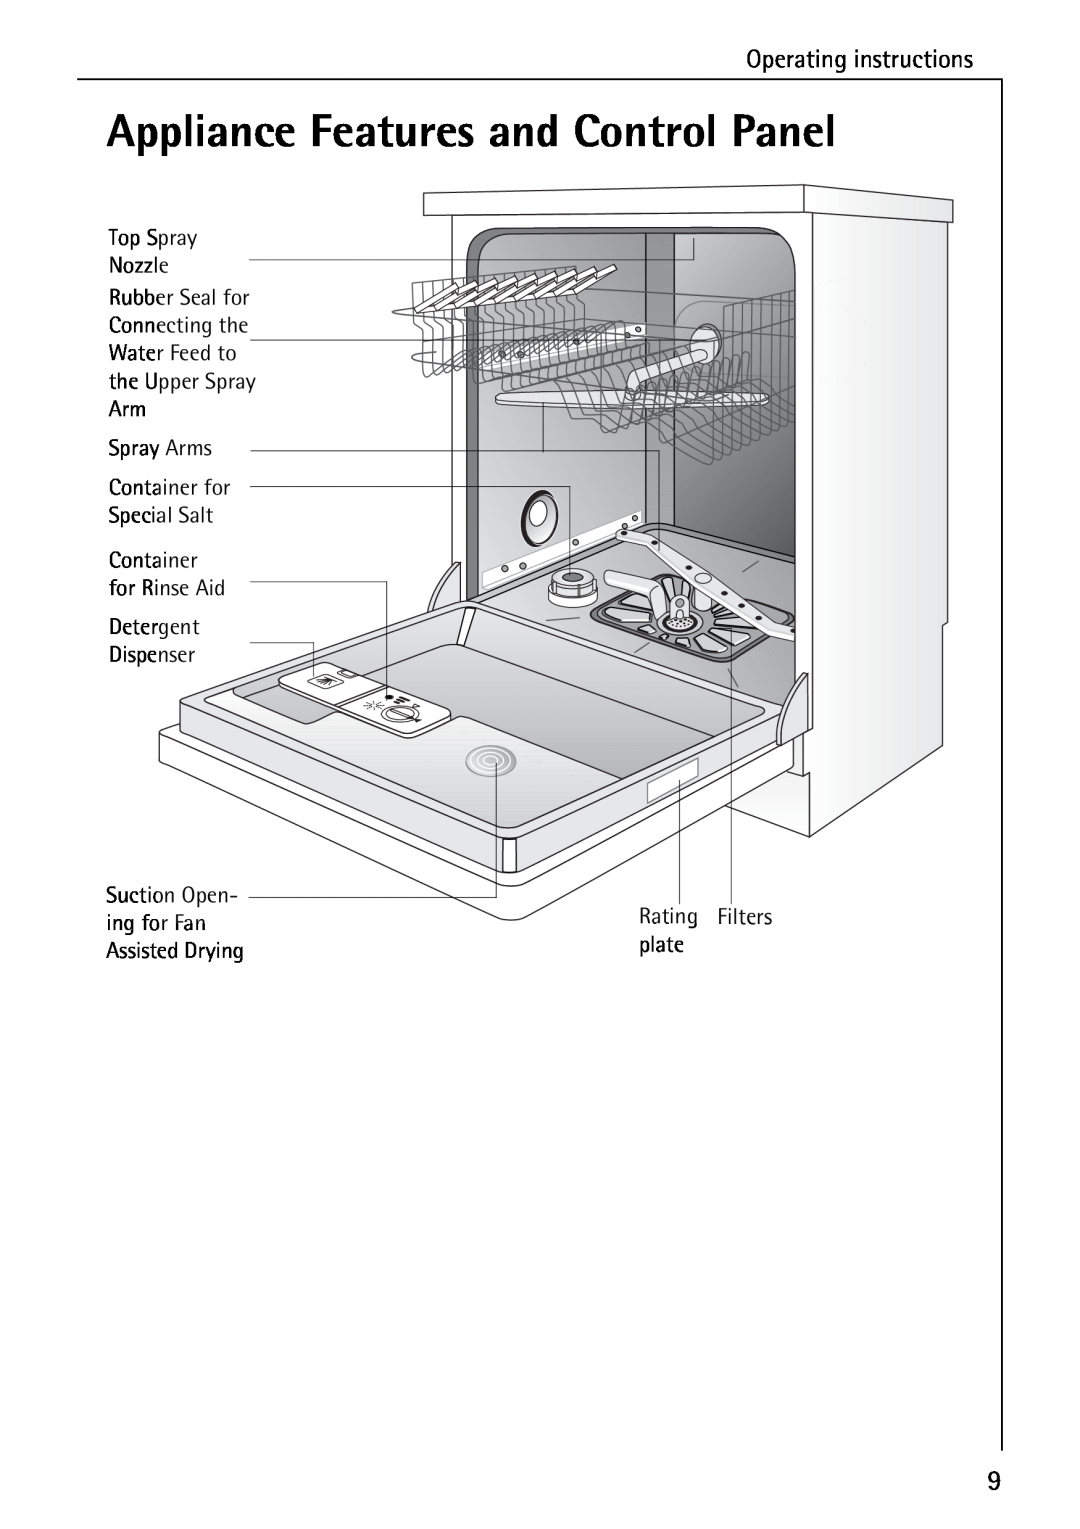 AEG 6281 I manual Appliance Features and Control Panel, Operating instructions 